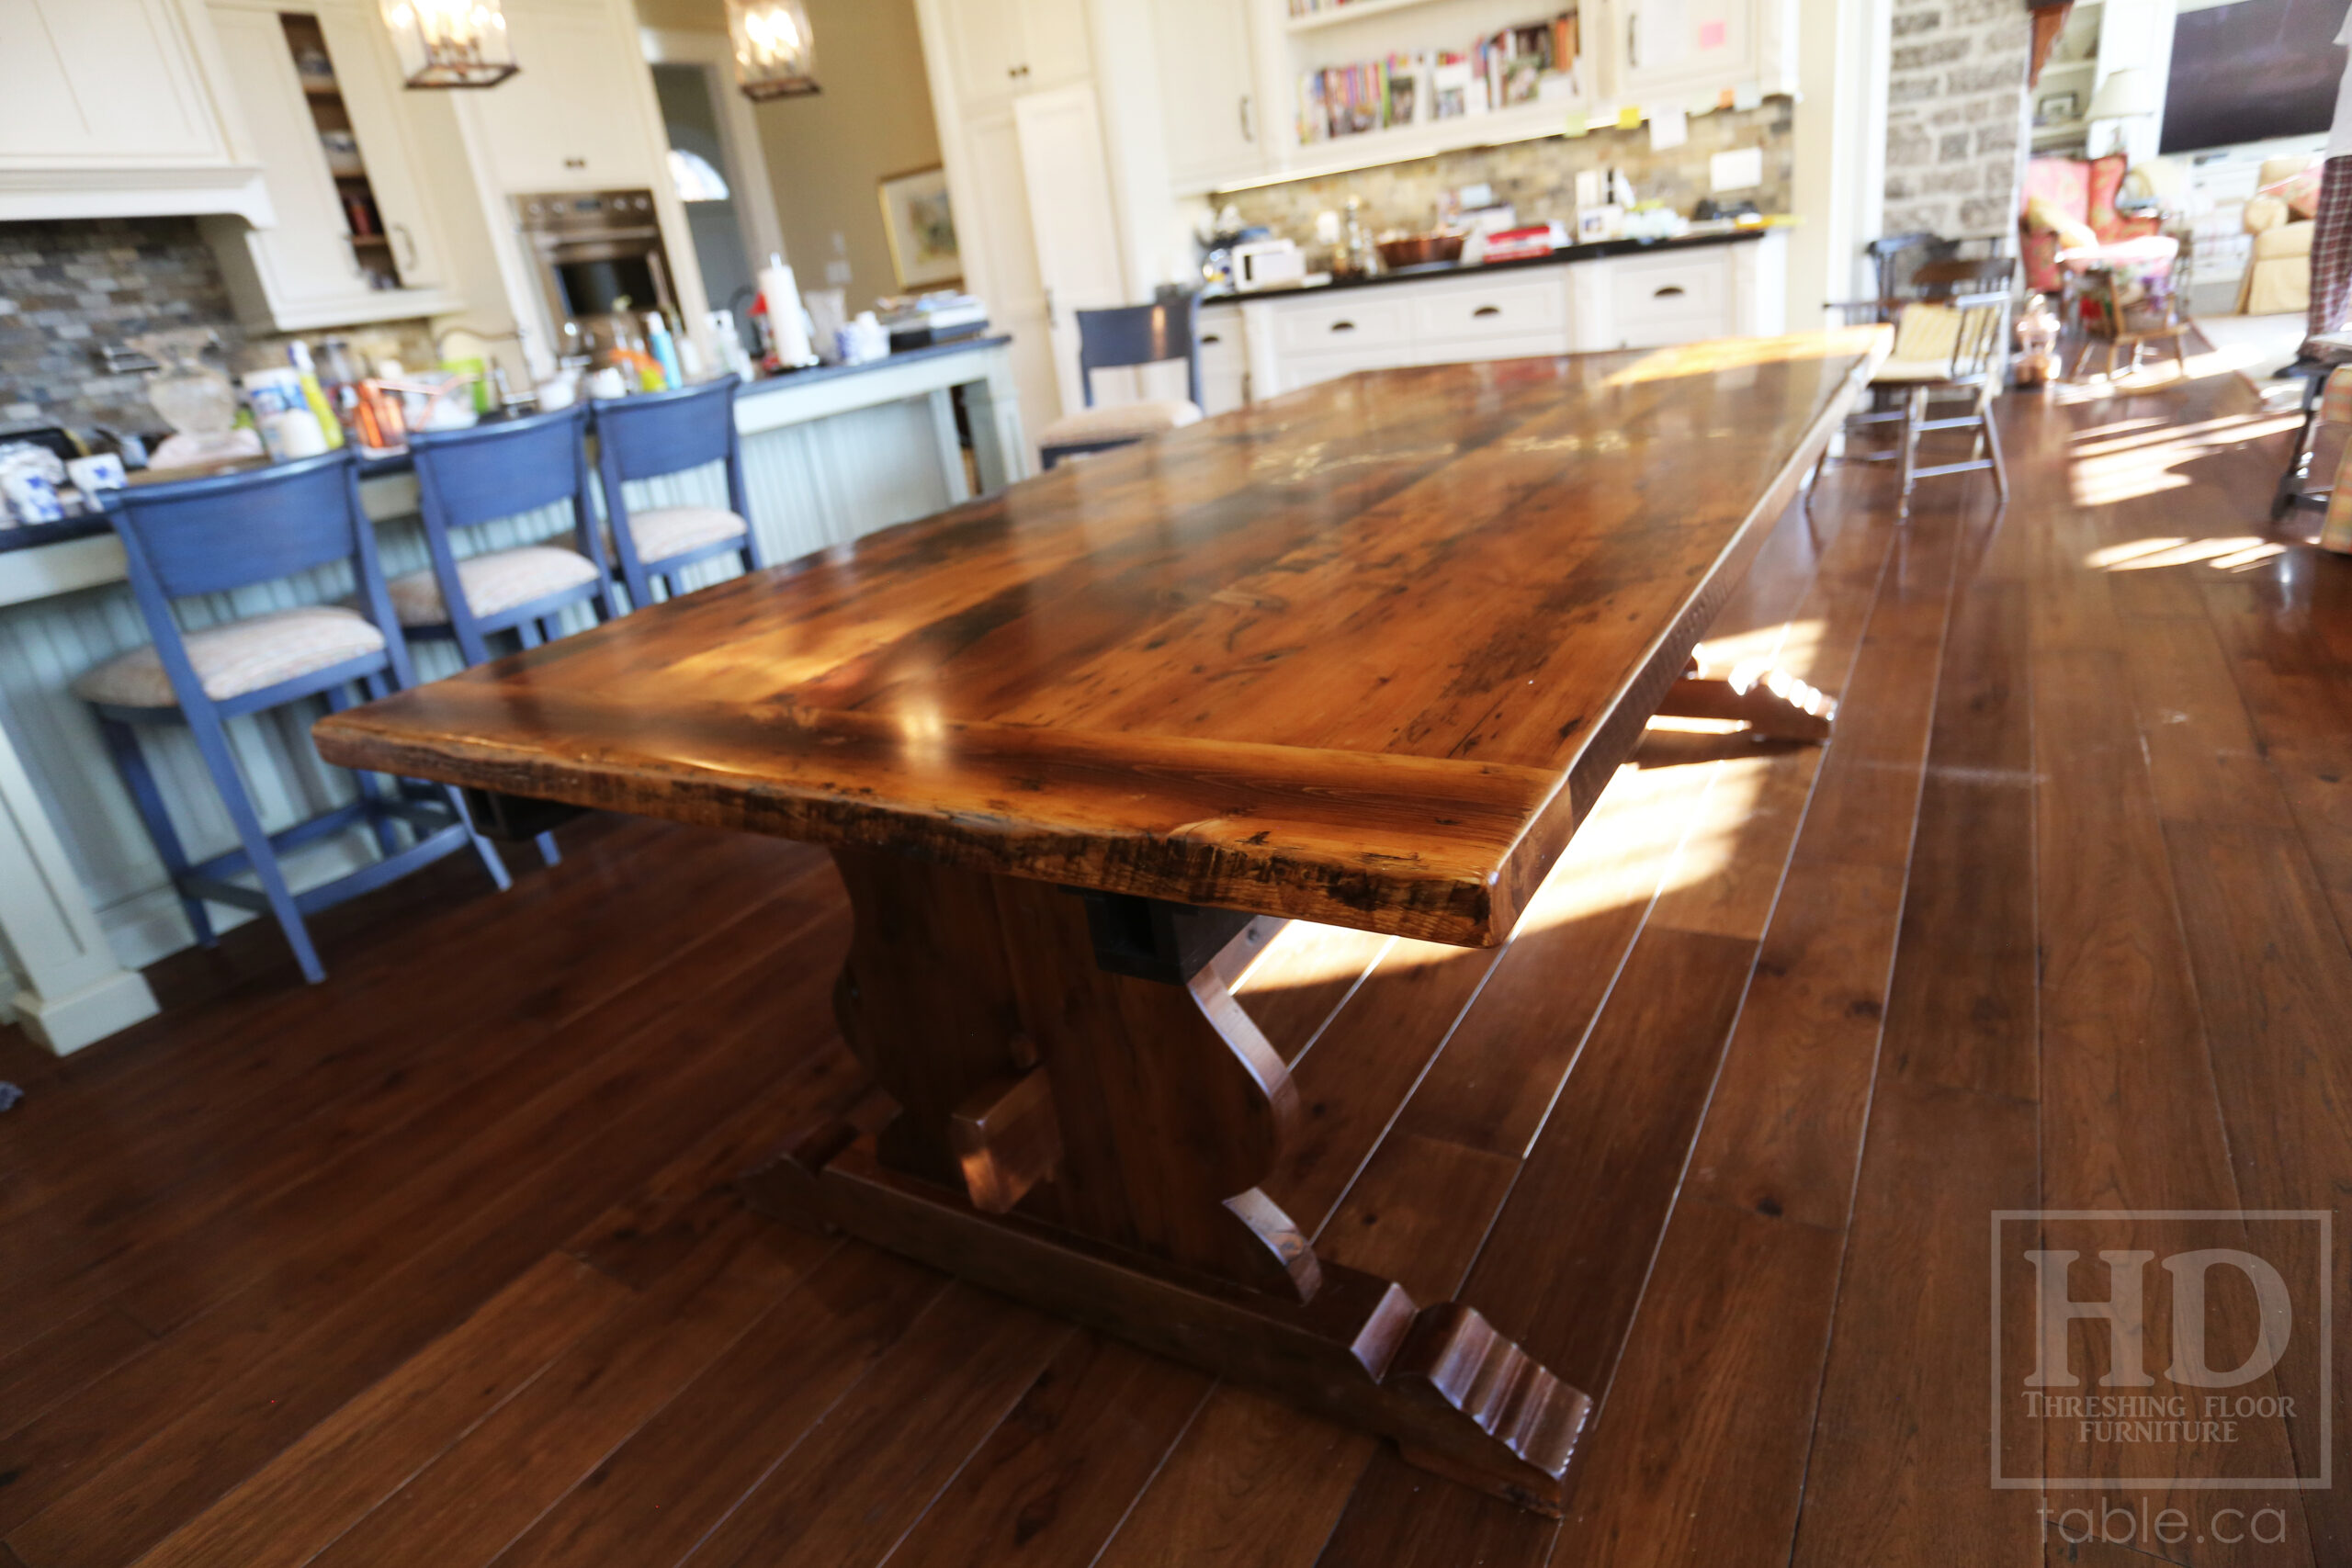 8' Ontario Barnwood Table we made for a Puslinch, Ontario home - 42" wide - Trestle Base [Violin shaped profile option] - Old Growth Hemlock Threshing Floor Construction - Original edges & distressing maintained - Premium epoxy + satin polyurethane finish - Two 18" Leaves - www.table.ca